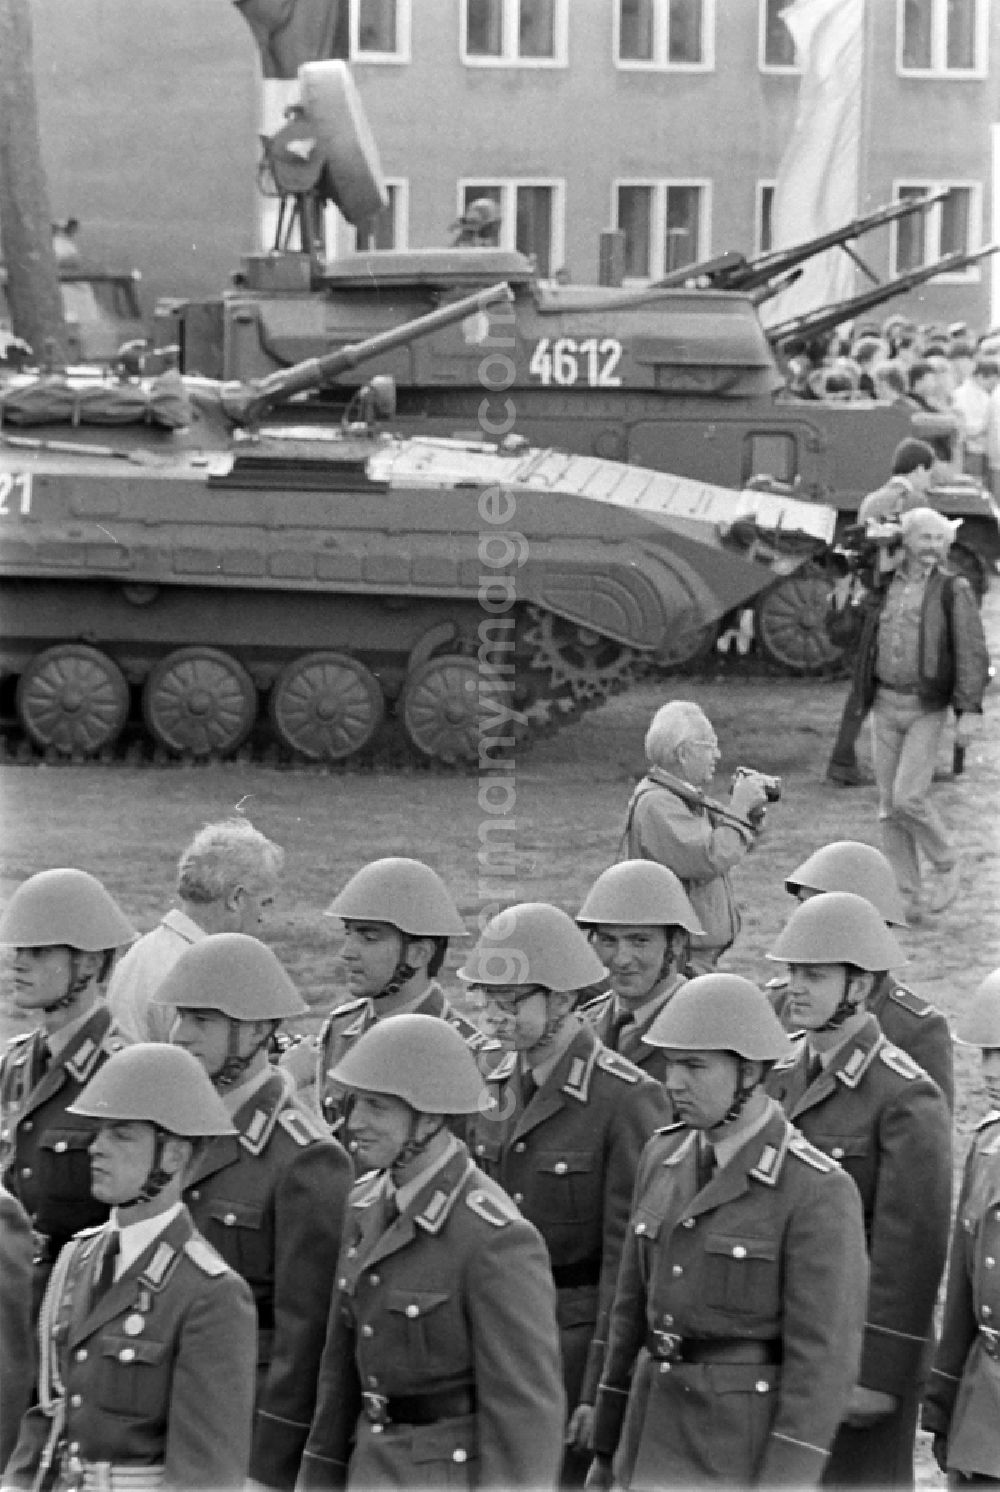 GDR photo archive: Goldberg - Parade formation and march of soldiers and officers of Panzer Regiment 8 (PR-8) on the occasion of the ceremonial and media-effective dissolution of the troop unit on the grounds of the Artur-Becker barracks in Goldberg in the state of Mecklenburg-Western Pomerania in the area of the former GDR, German Democratic Republic